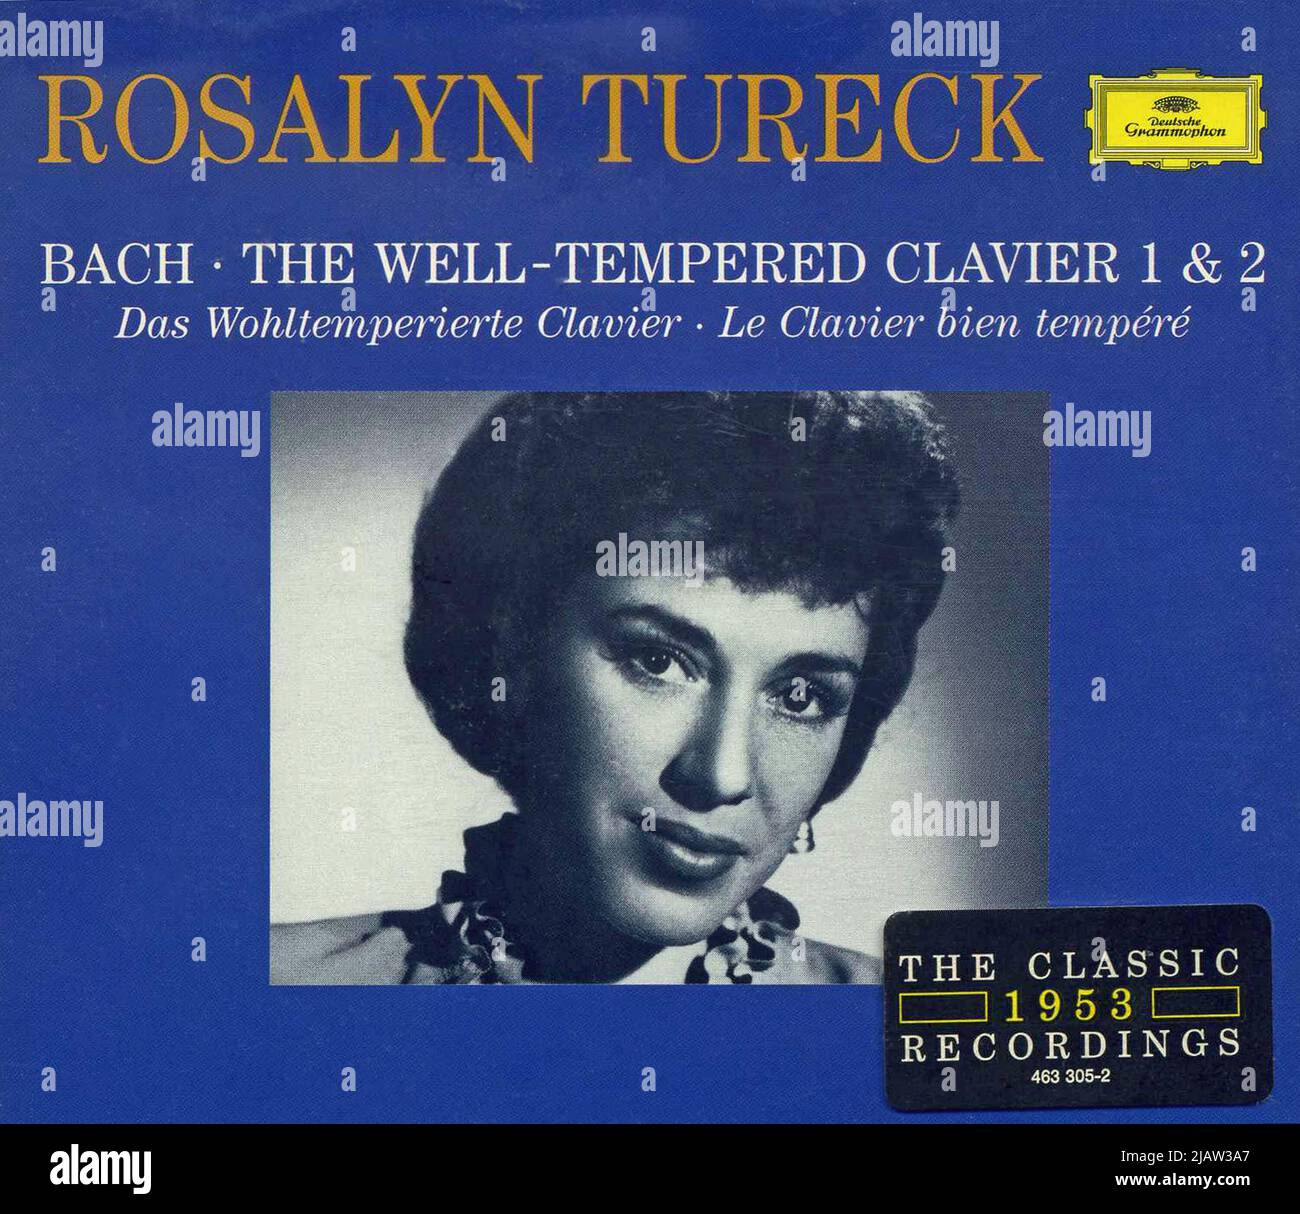 CD cover. 'The Well-Tempered Clavier 1 & 2'. J.S.Bach. Rosalyn Tureck. Stock Photo